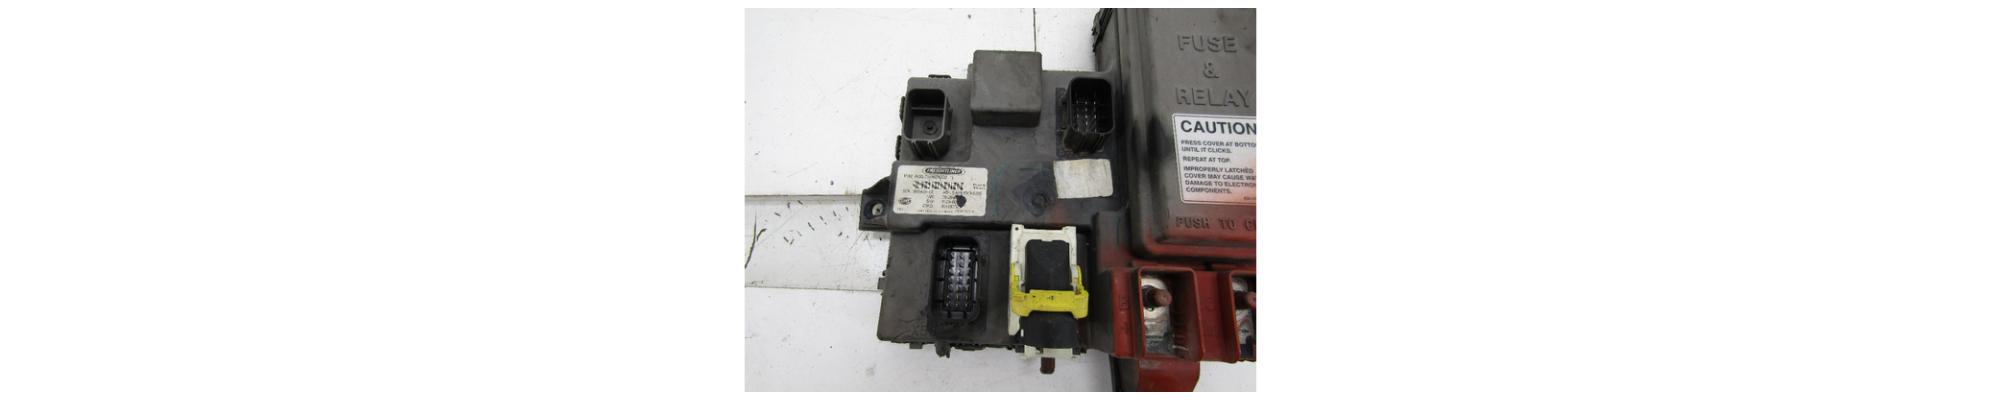 Kenworth T800 Fuse Box Removal